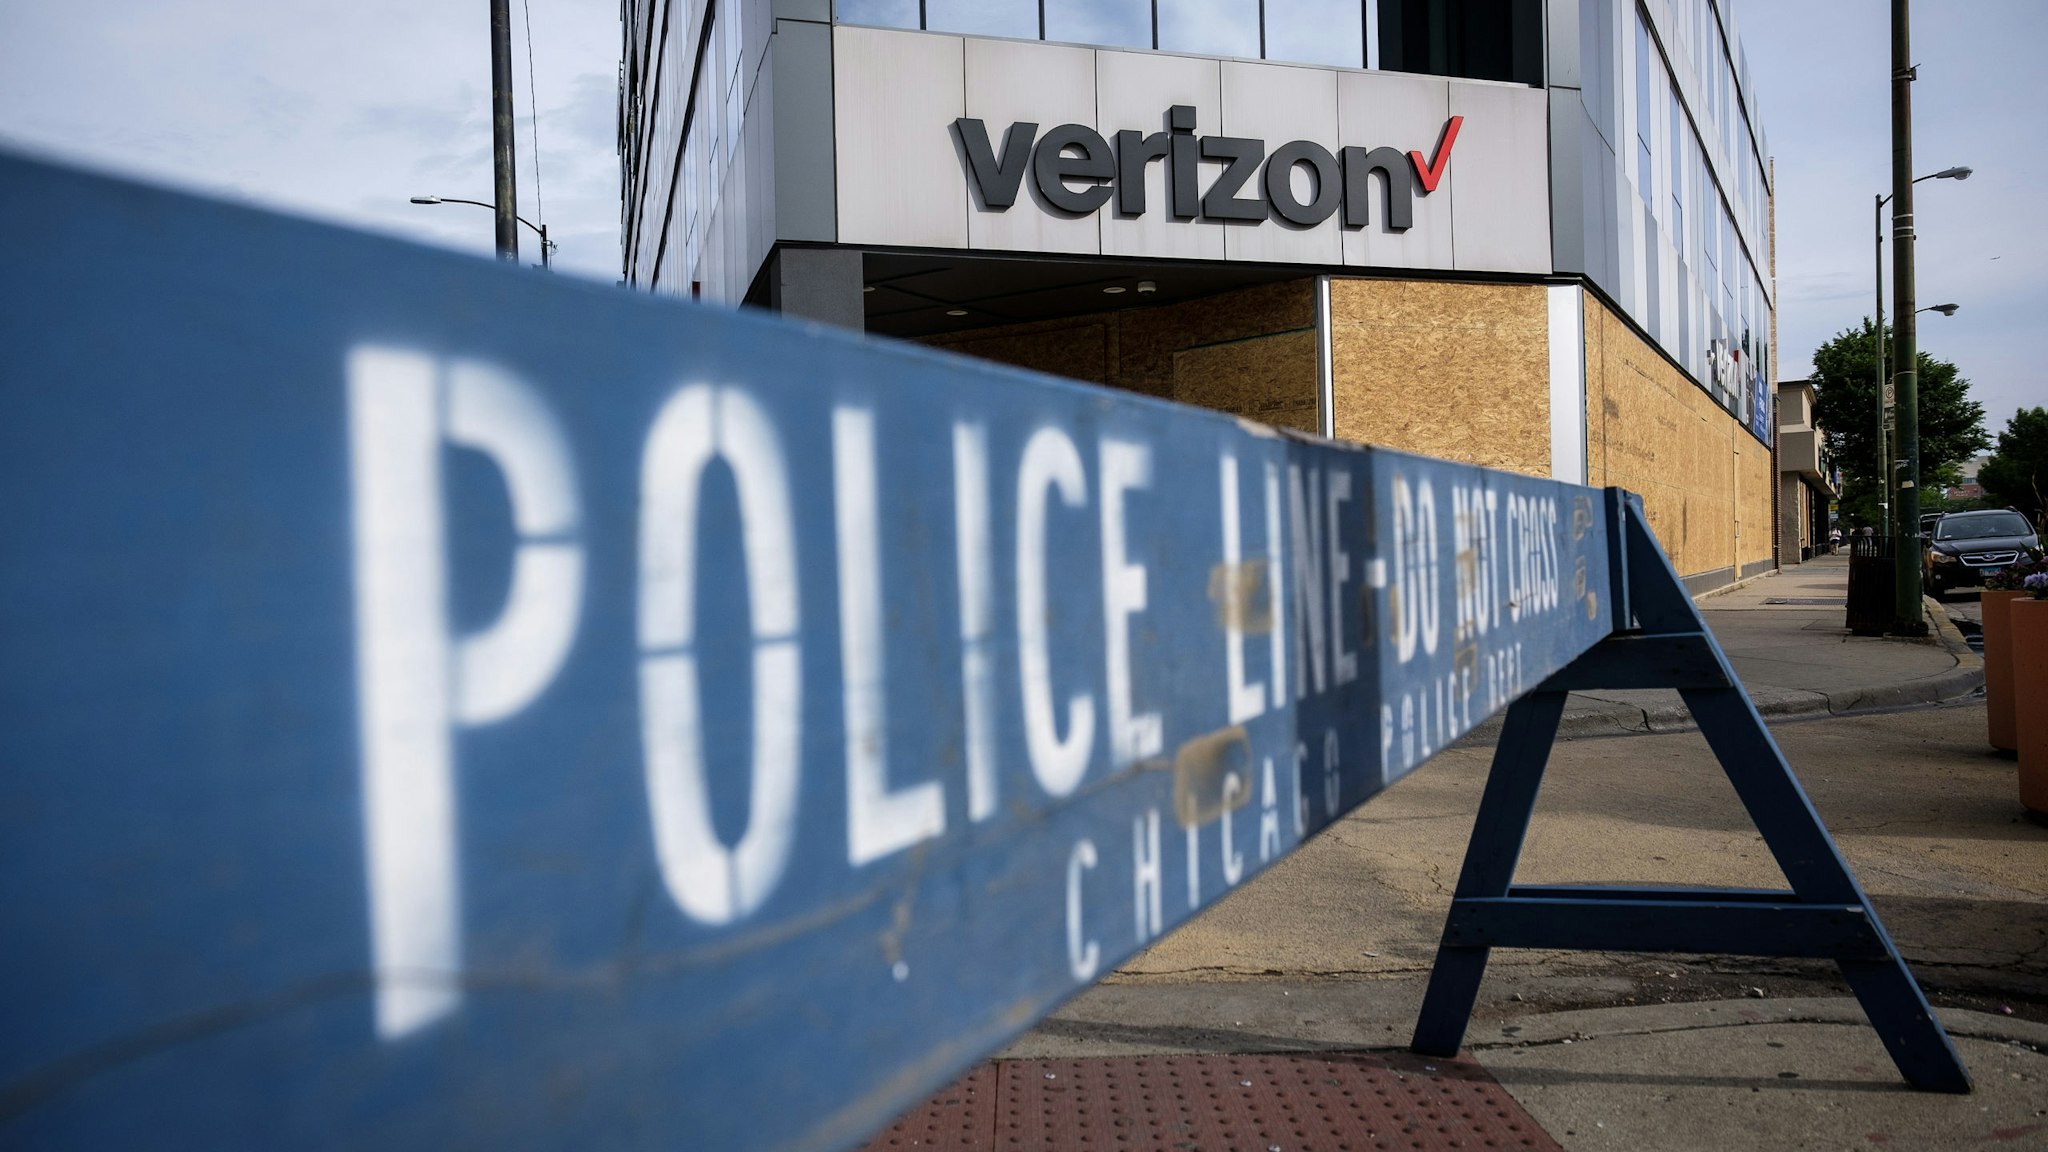 A police barricade stands in front of a boarded up Verizon store in Chicago, Illinois, U.S., on Friday, June 5, 2020. Protesters have come out in droves across the U.S. to speak out against the killing of George Floyd and though they have been largely peaceful, some people have used the unrest as an opportunity to vandalize and loot stores in many cities. Photographer: Christopher Dilts/Bloomberg via Getty Images